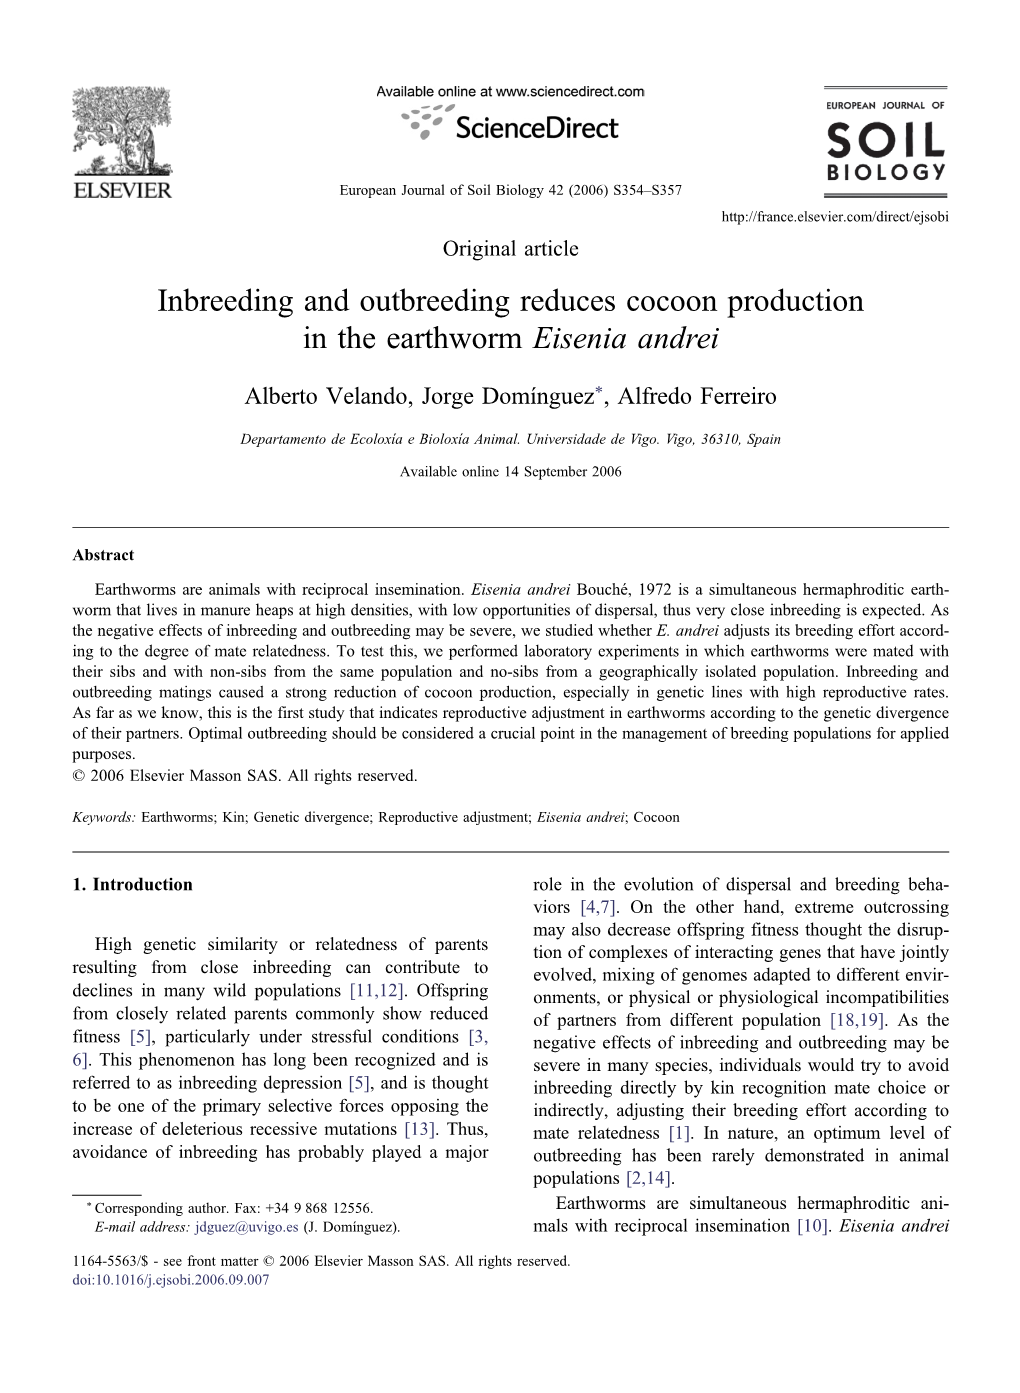 Inbreeding and Outbreeding Reduces Cocoon Production in the Earthworm Eisenia Andrei